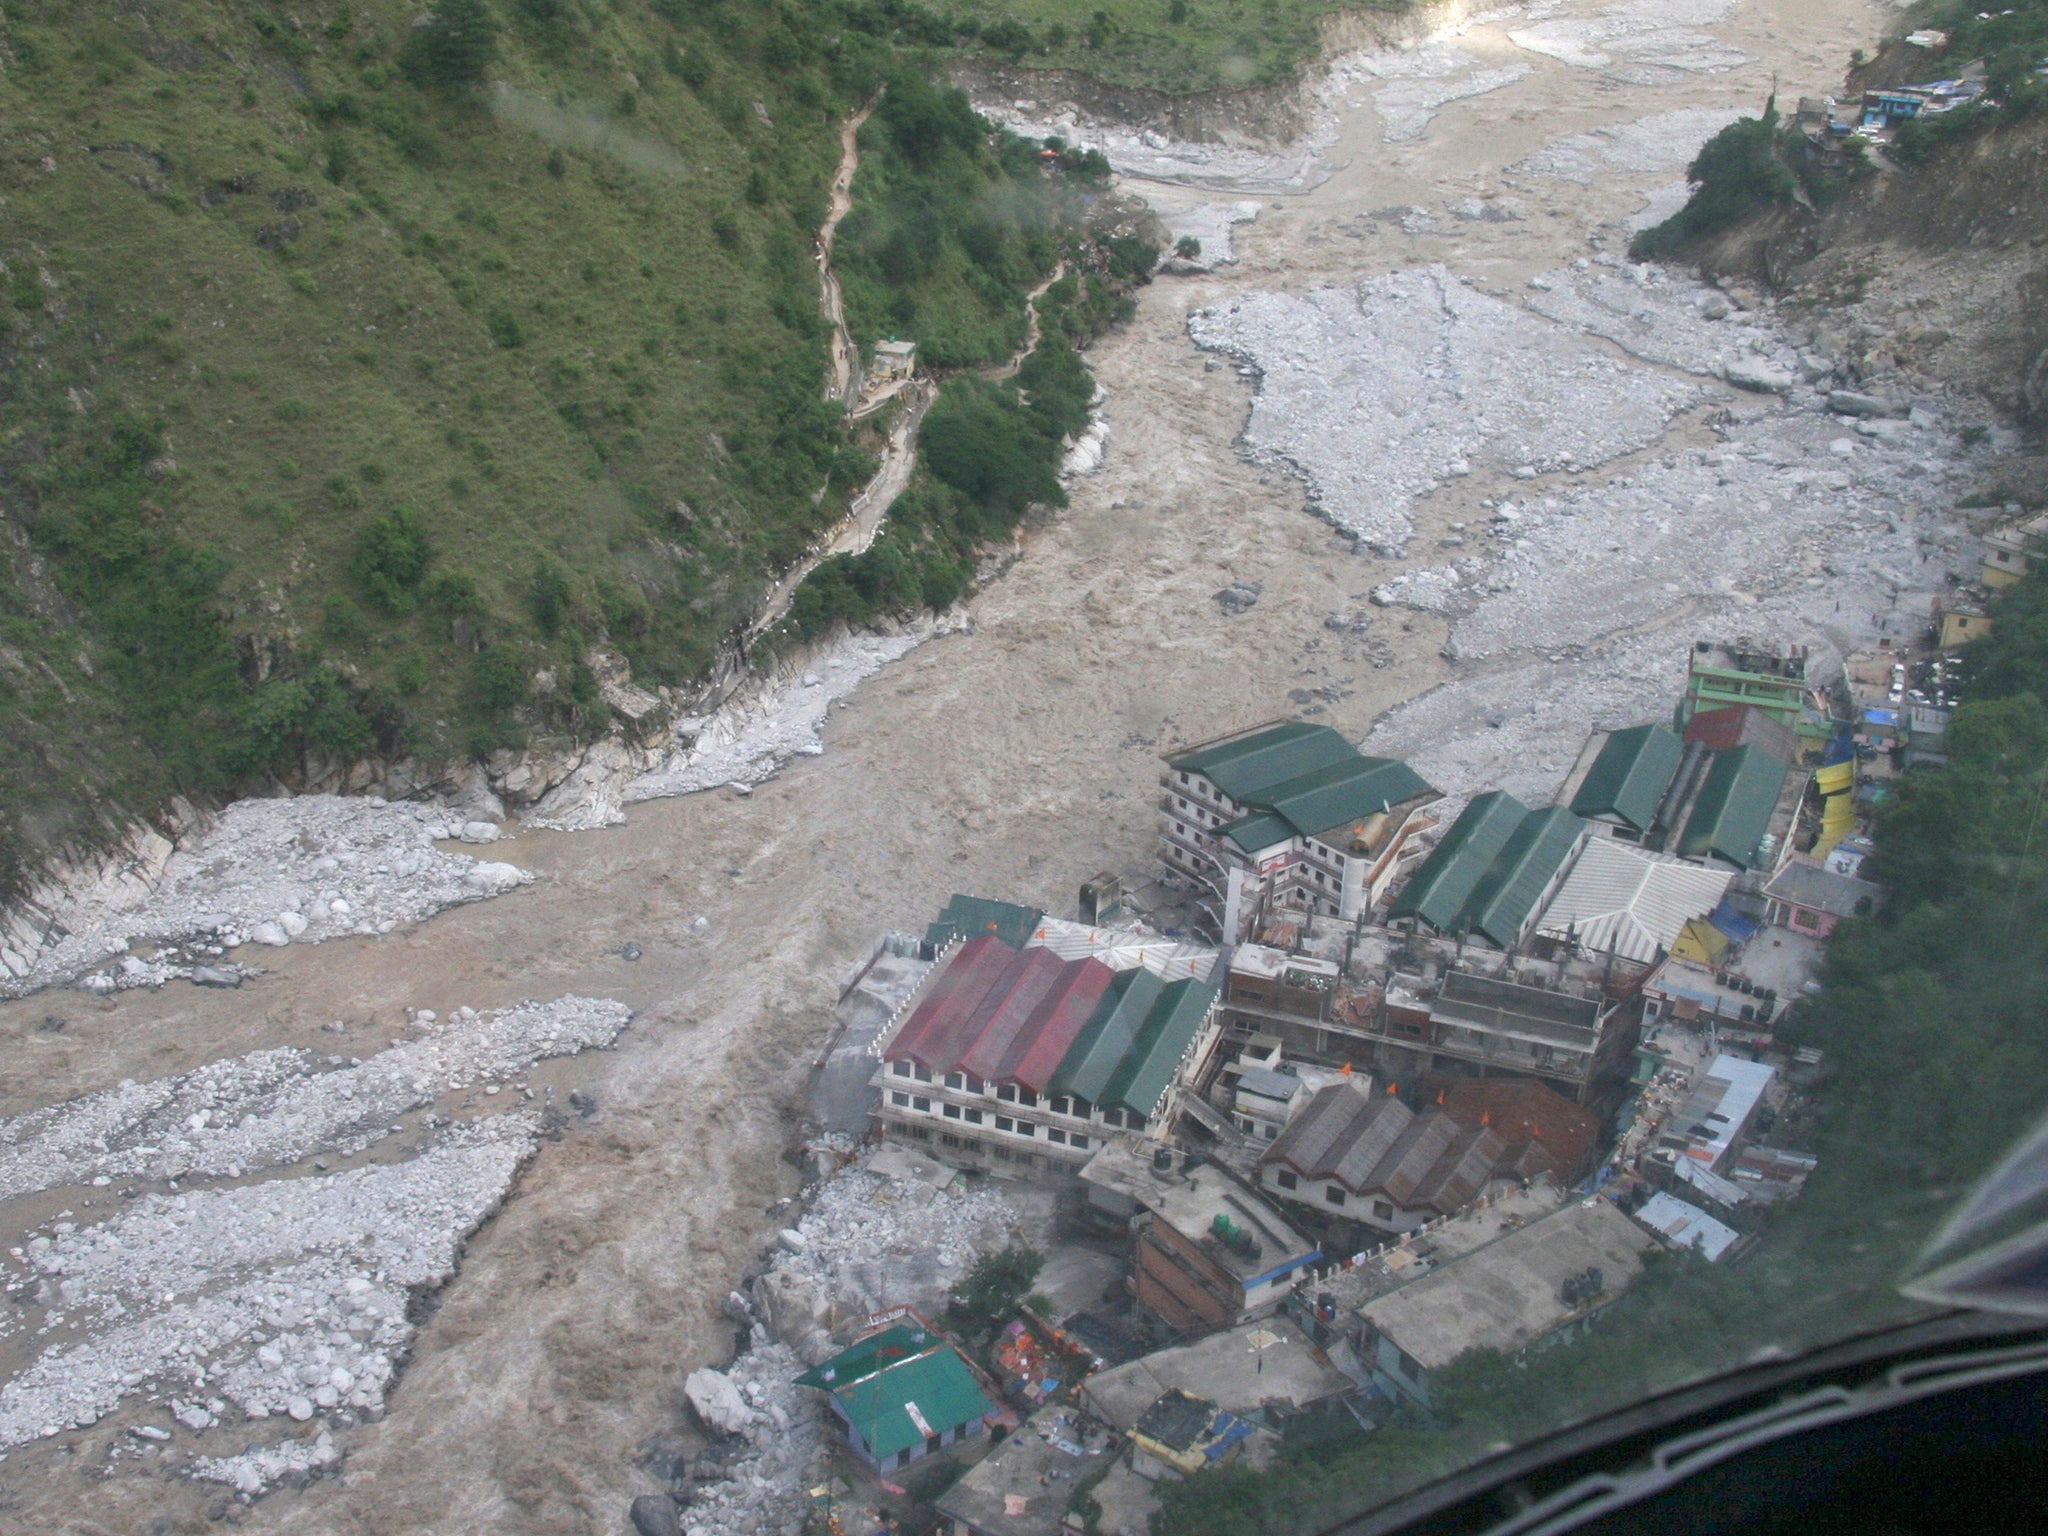 Flood waters flow next to a residential complex during major floods in the Himalayan state of Uttarakhand in 2013